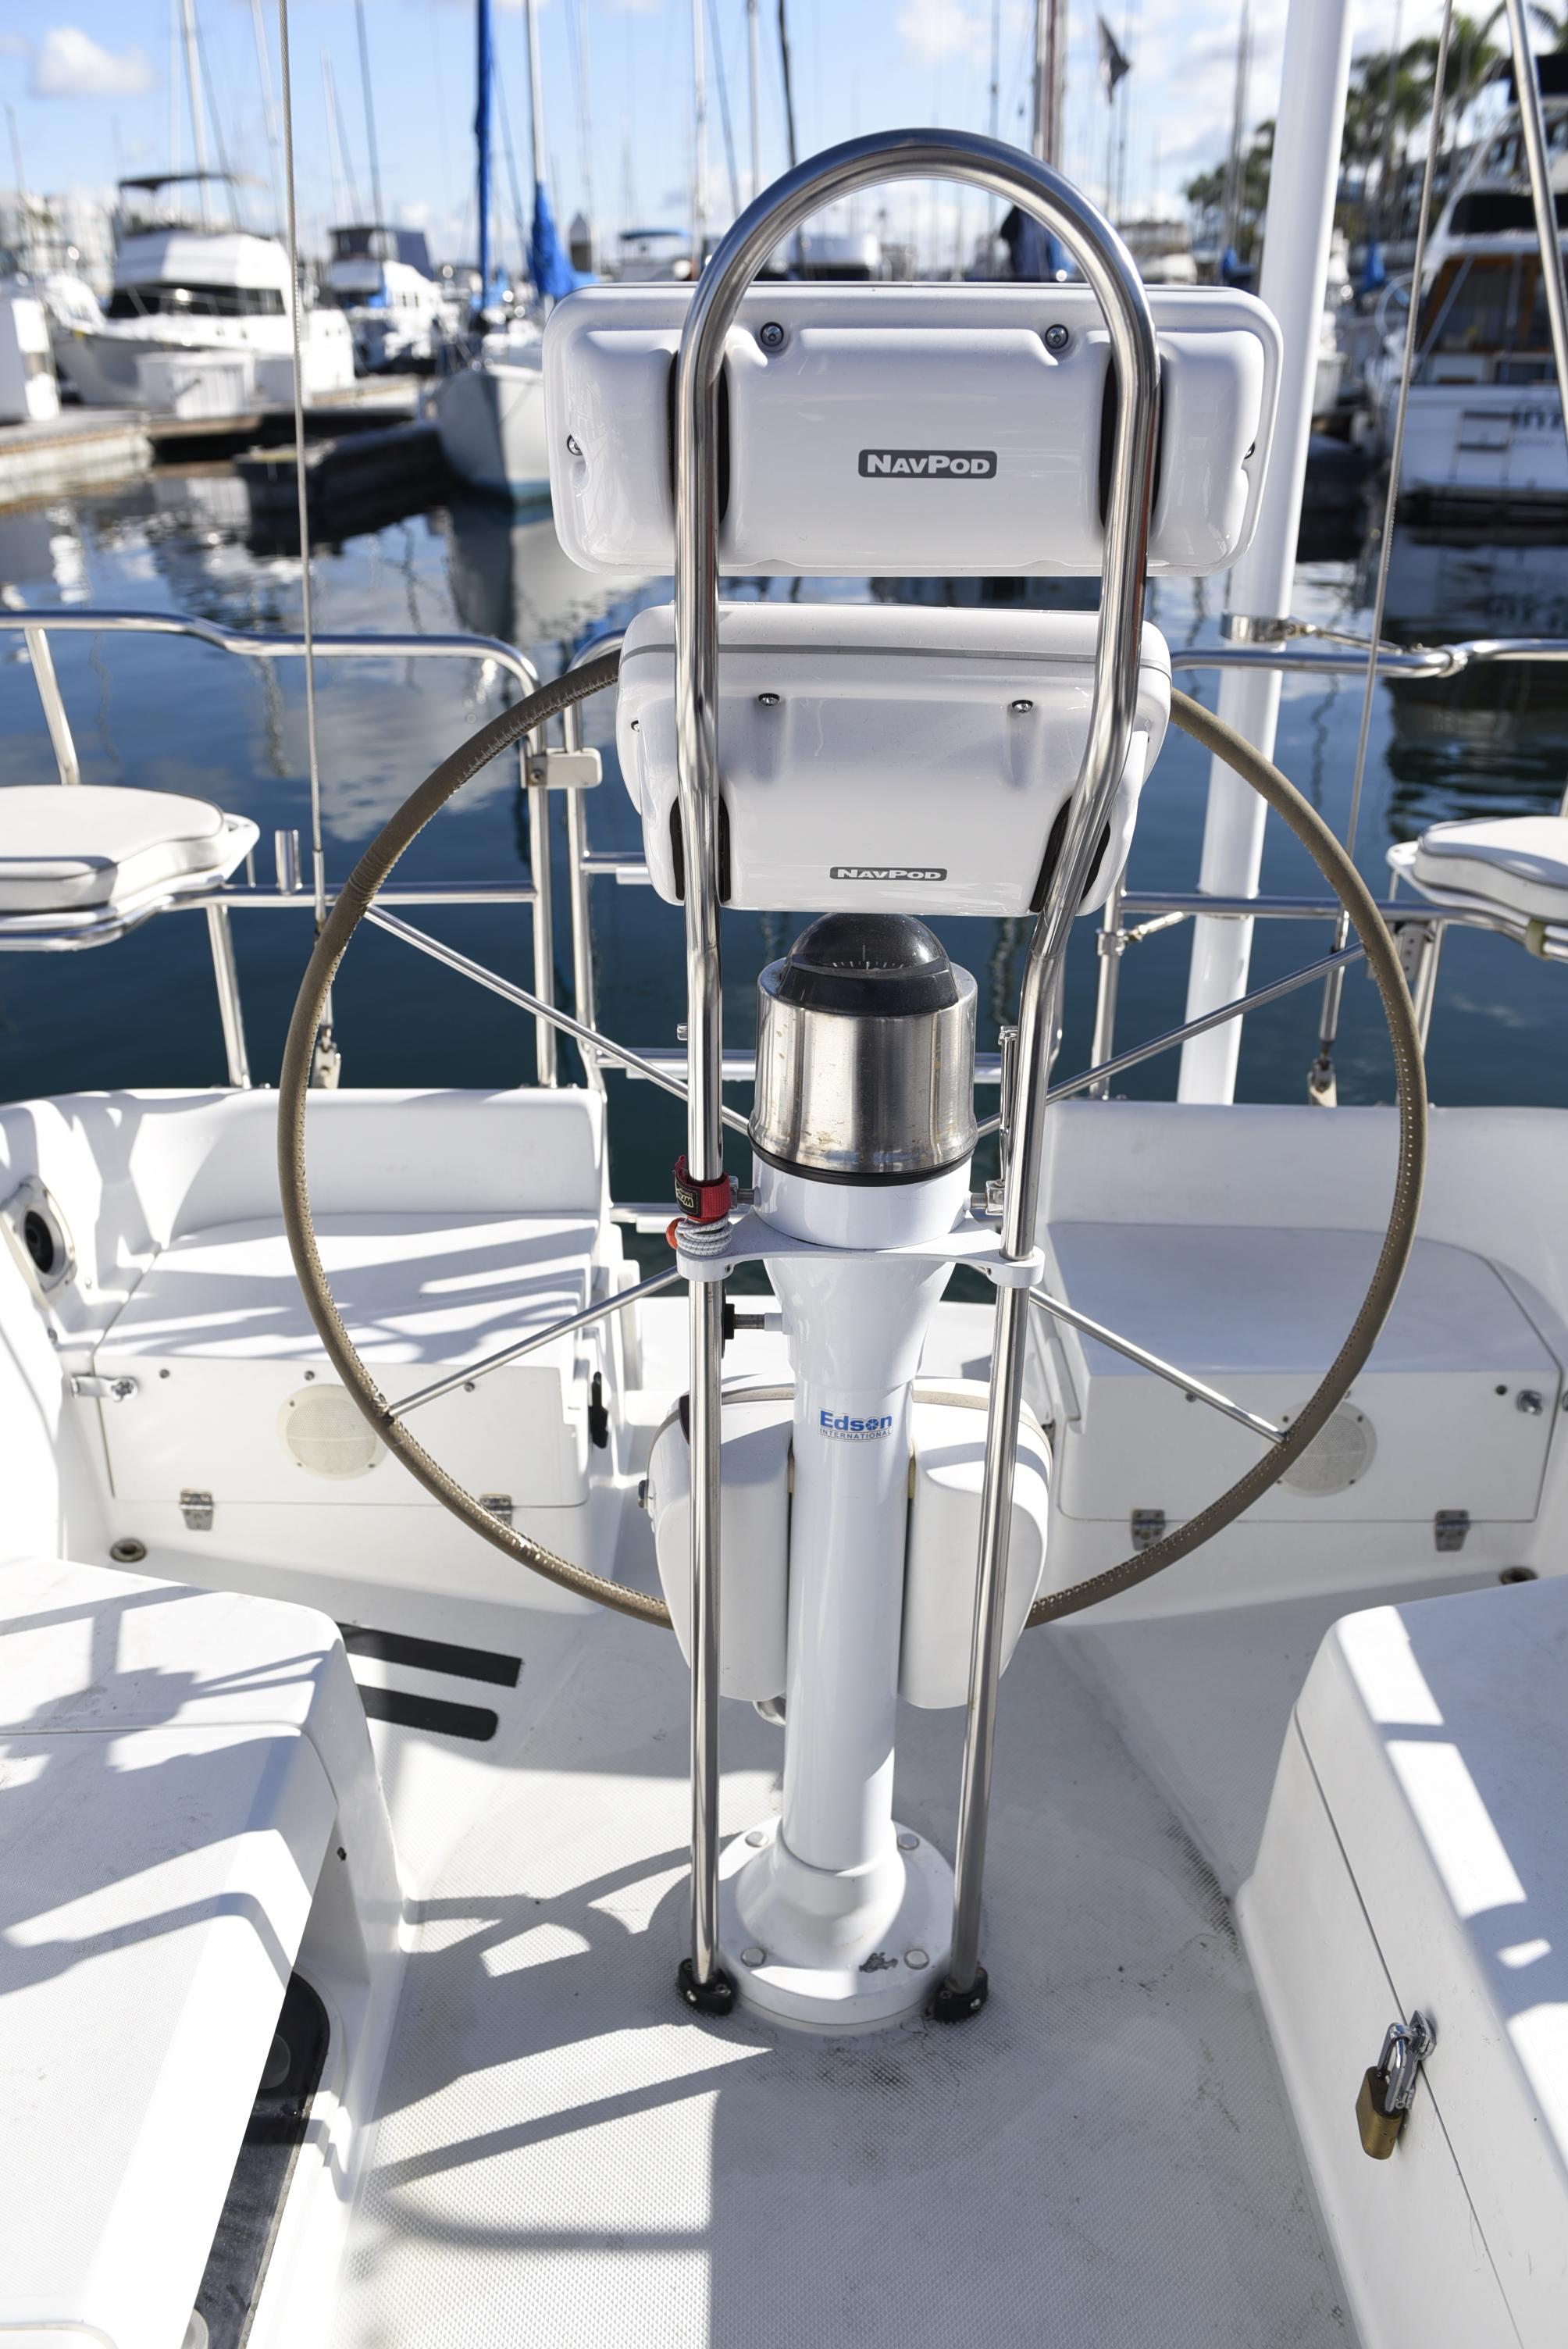 Steering with integrated instrument NavPods